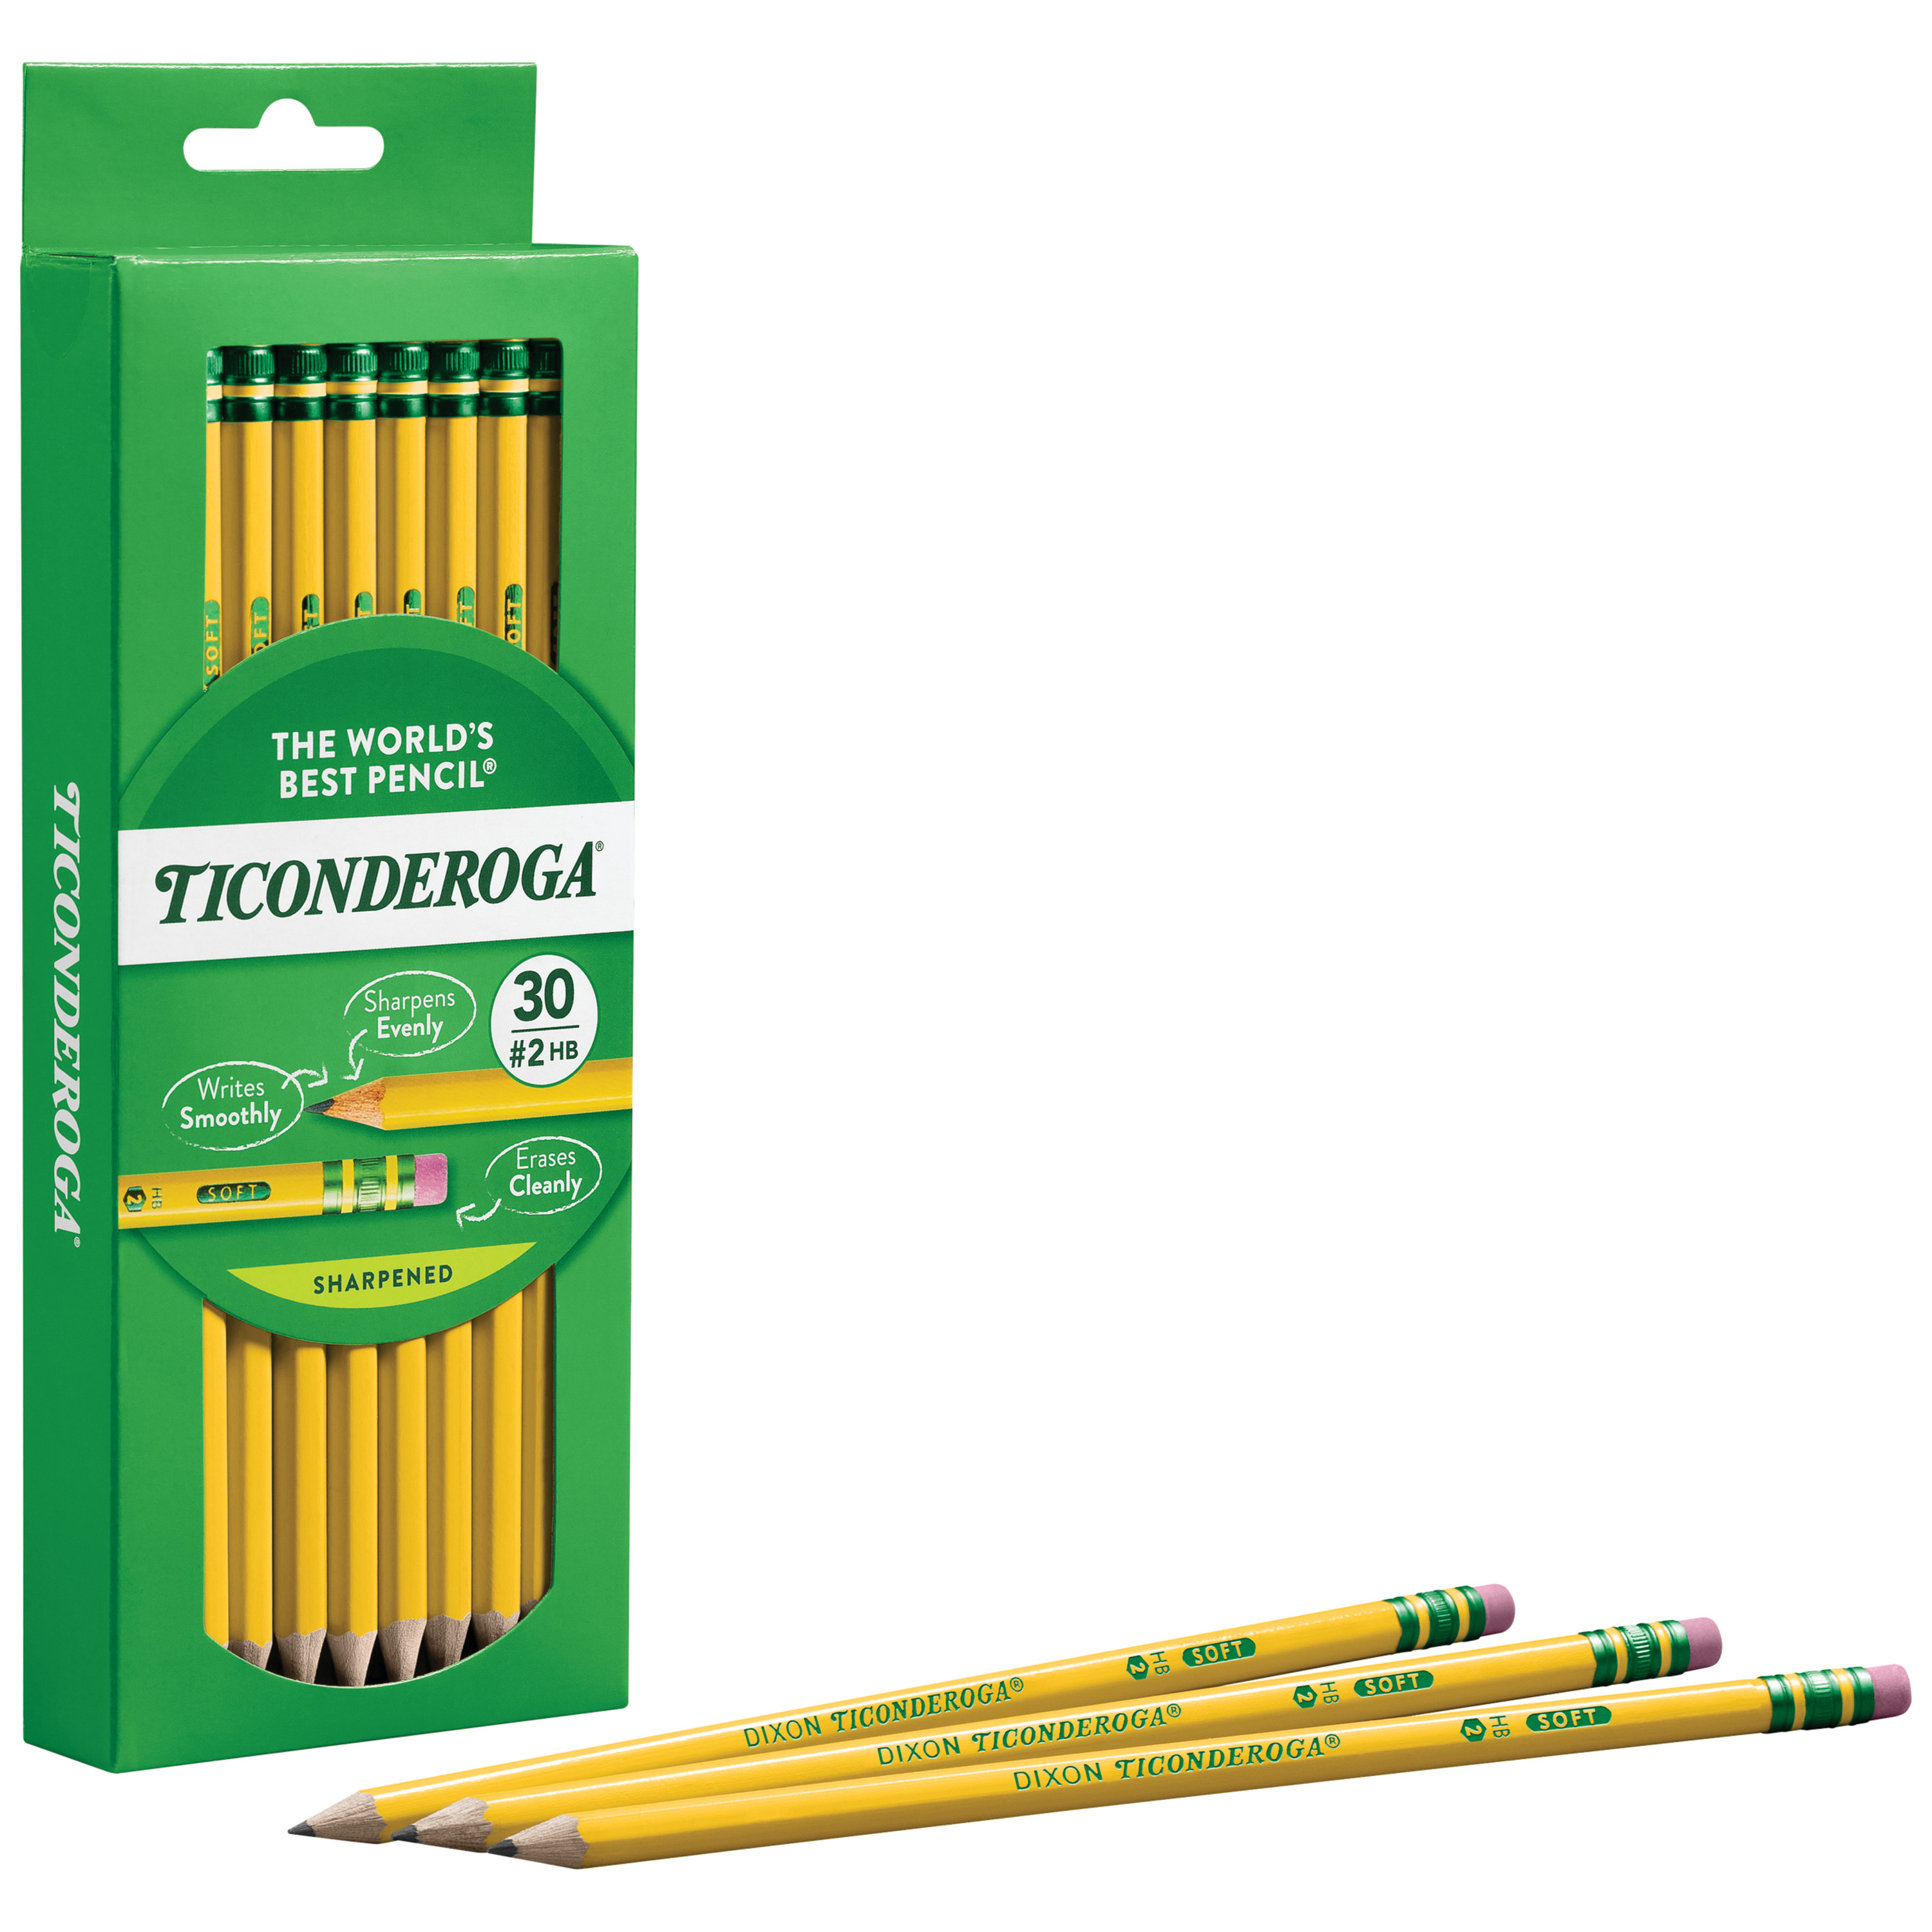 Ticonderoga Wood-Cased Pencils, Pre-Sharpened, #2 HB Soft, Yellow, 30 Count - image 3 of 6